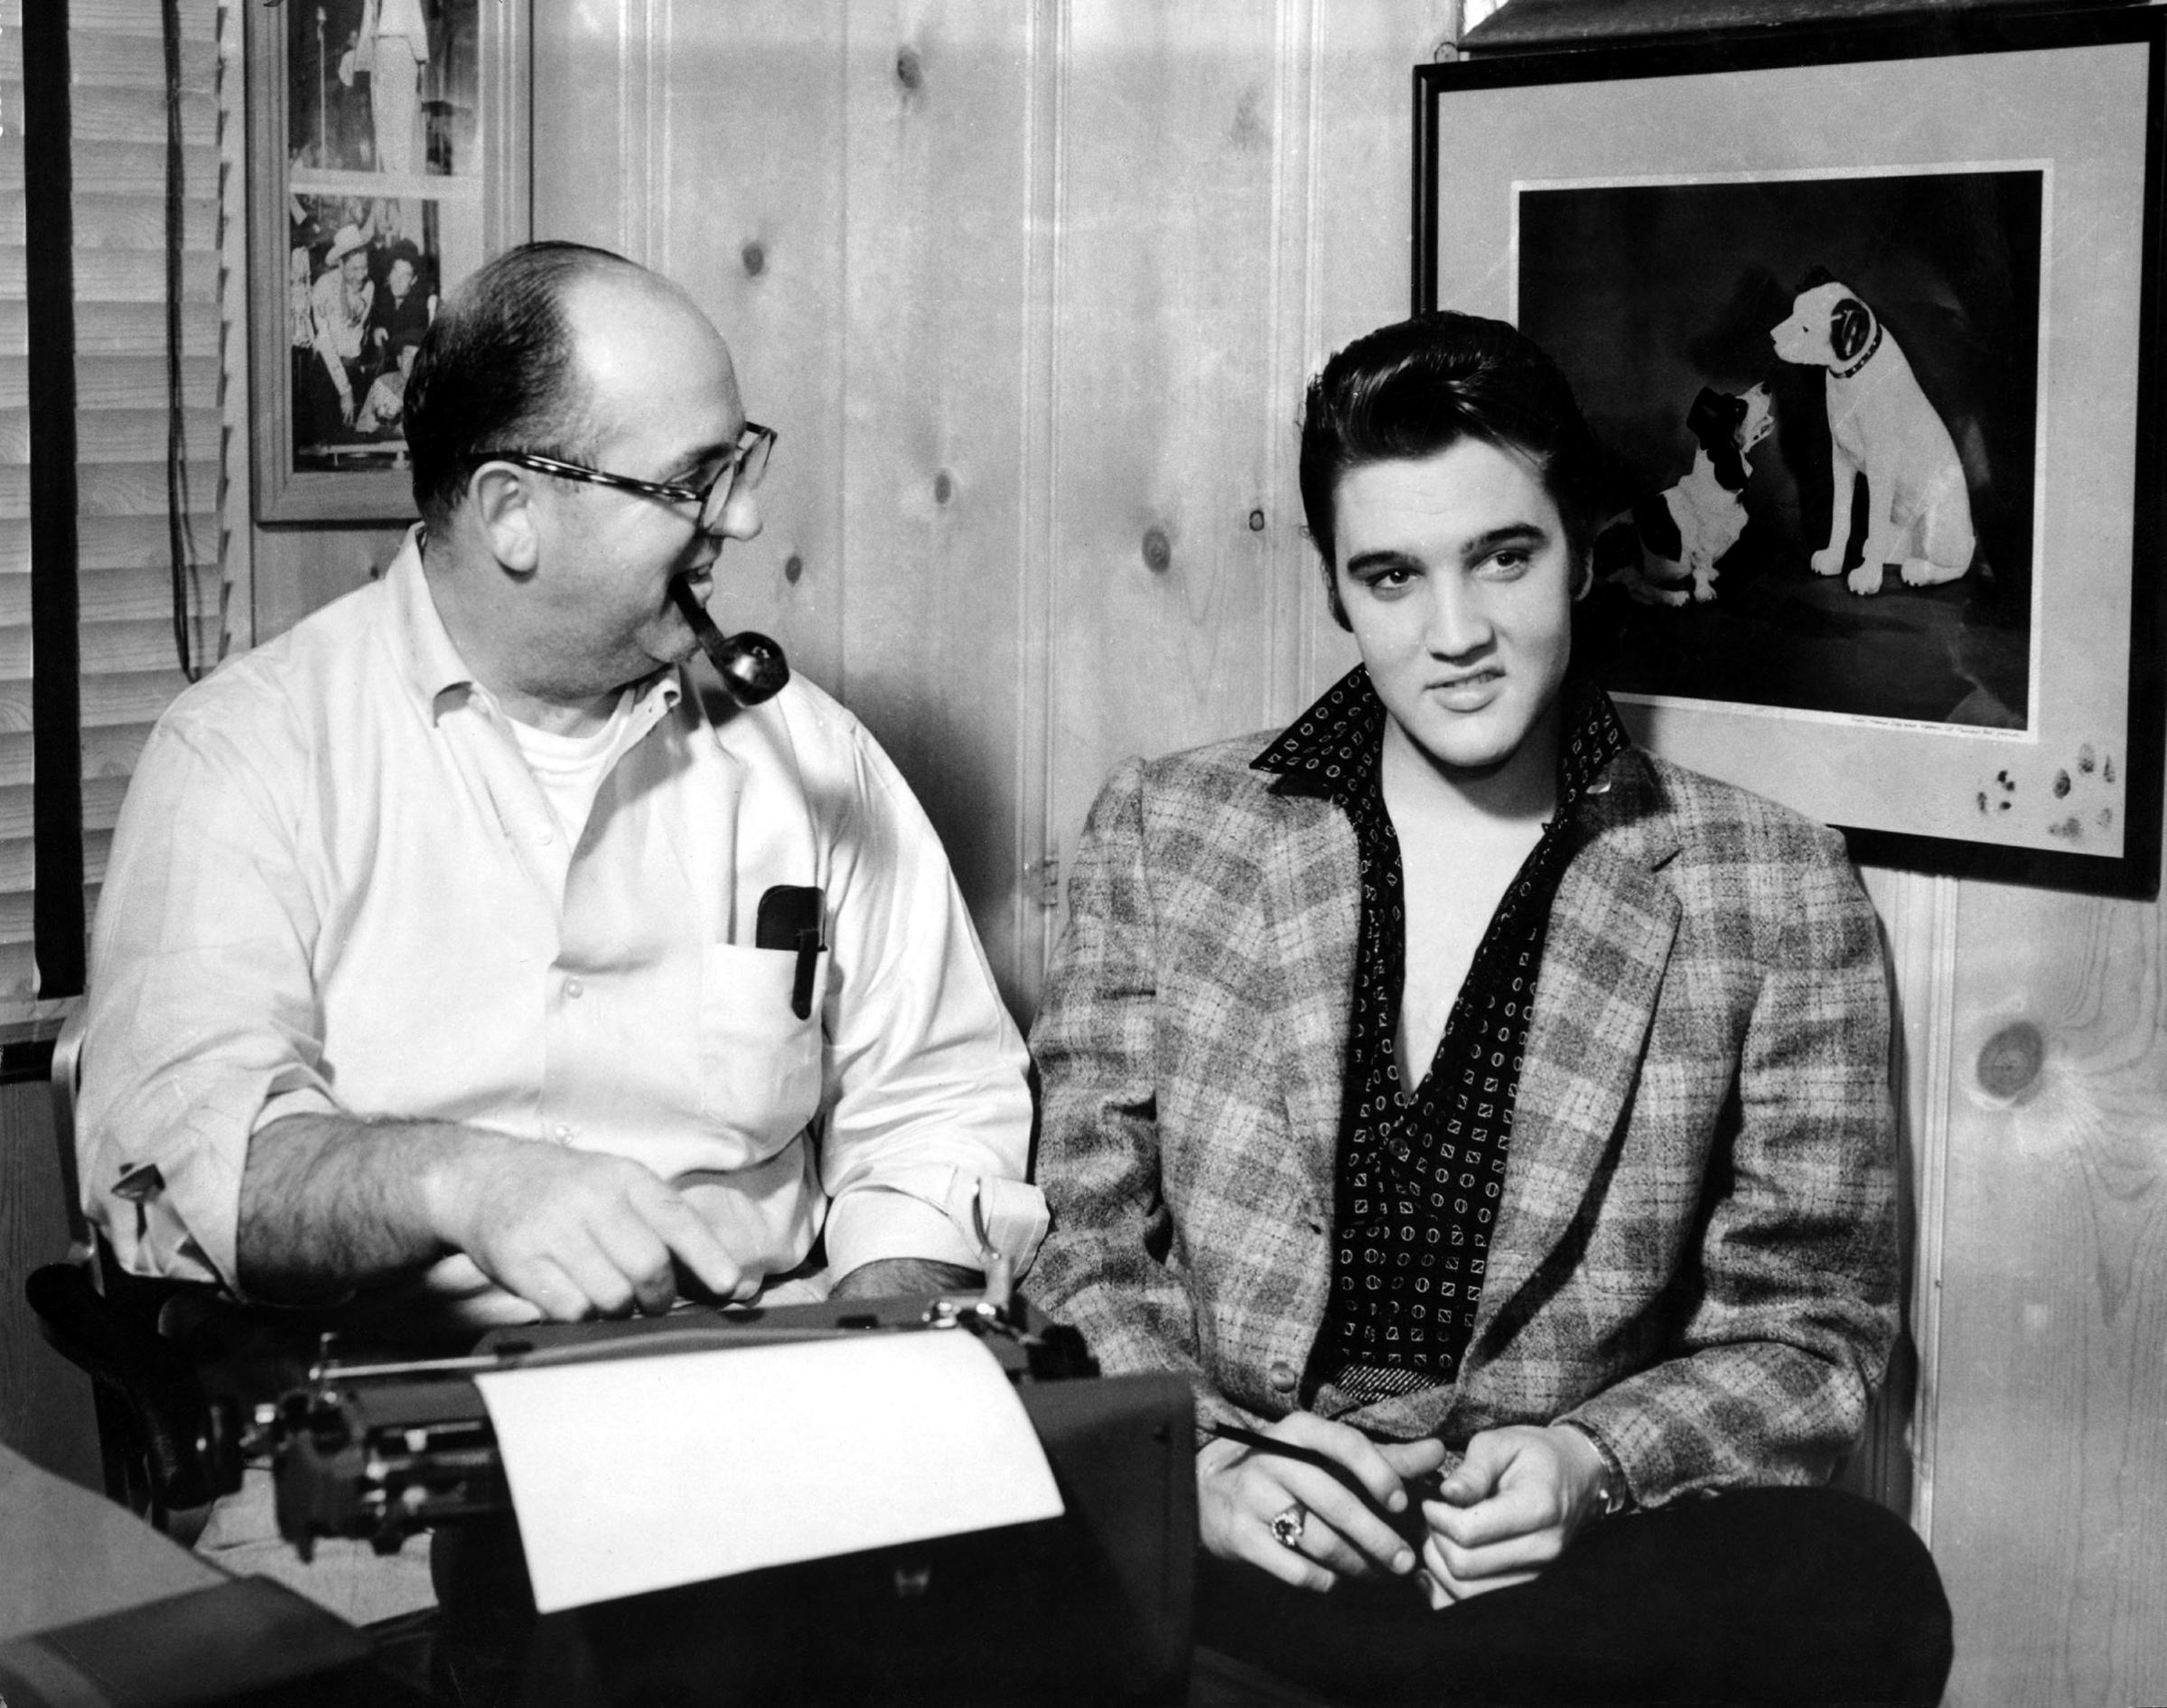 Elvis and his manager Colonel Tom Parker sit at a typewriter in front of the a picture of the RCA Victor Dog in circa 1956 in Memphis, Tennessee.